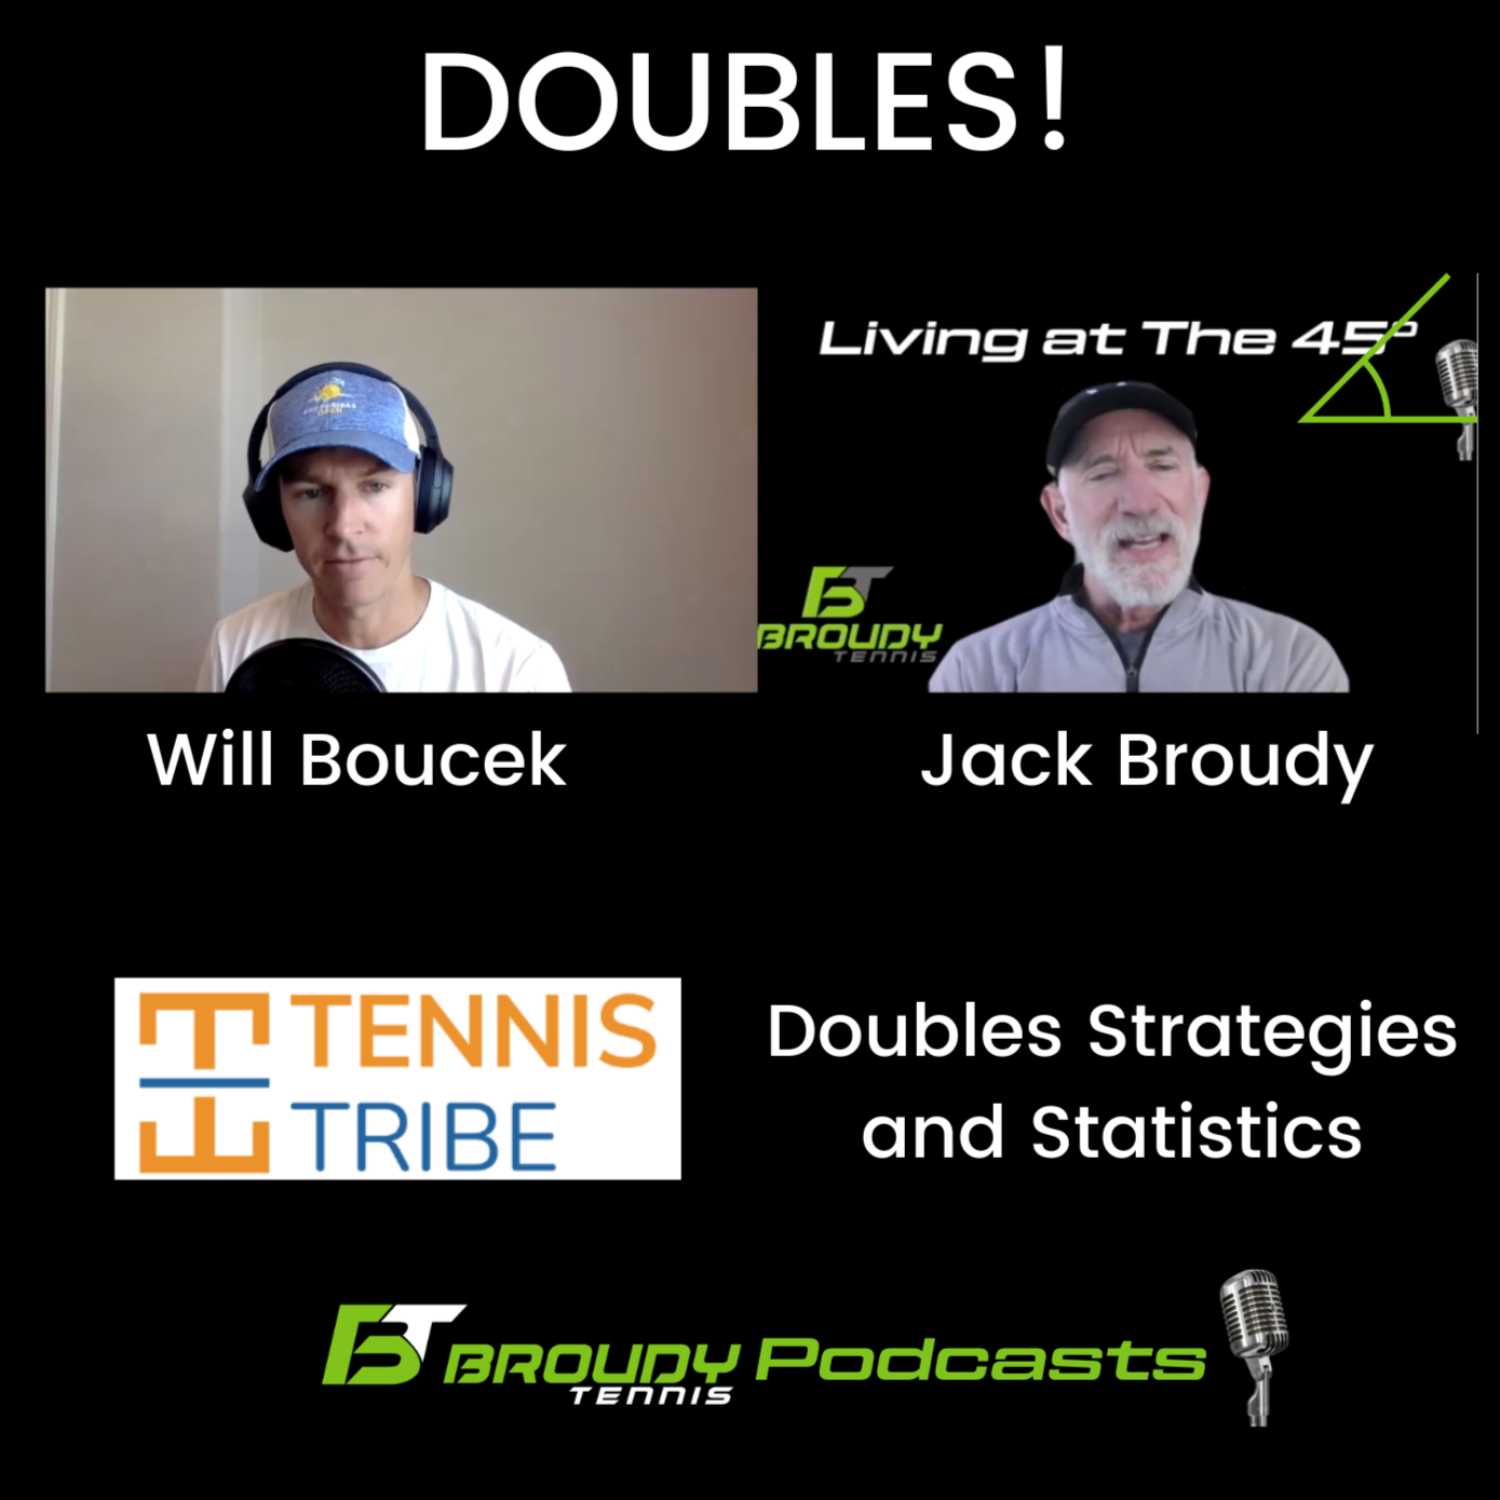 Living At The 45º with Will Boucek: Doubles! The Tennis Tribe